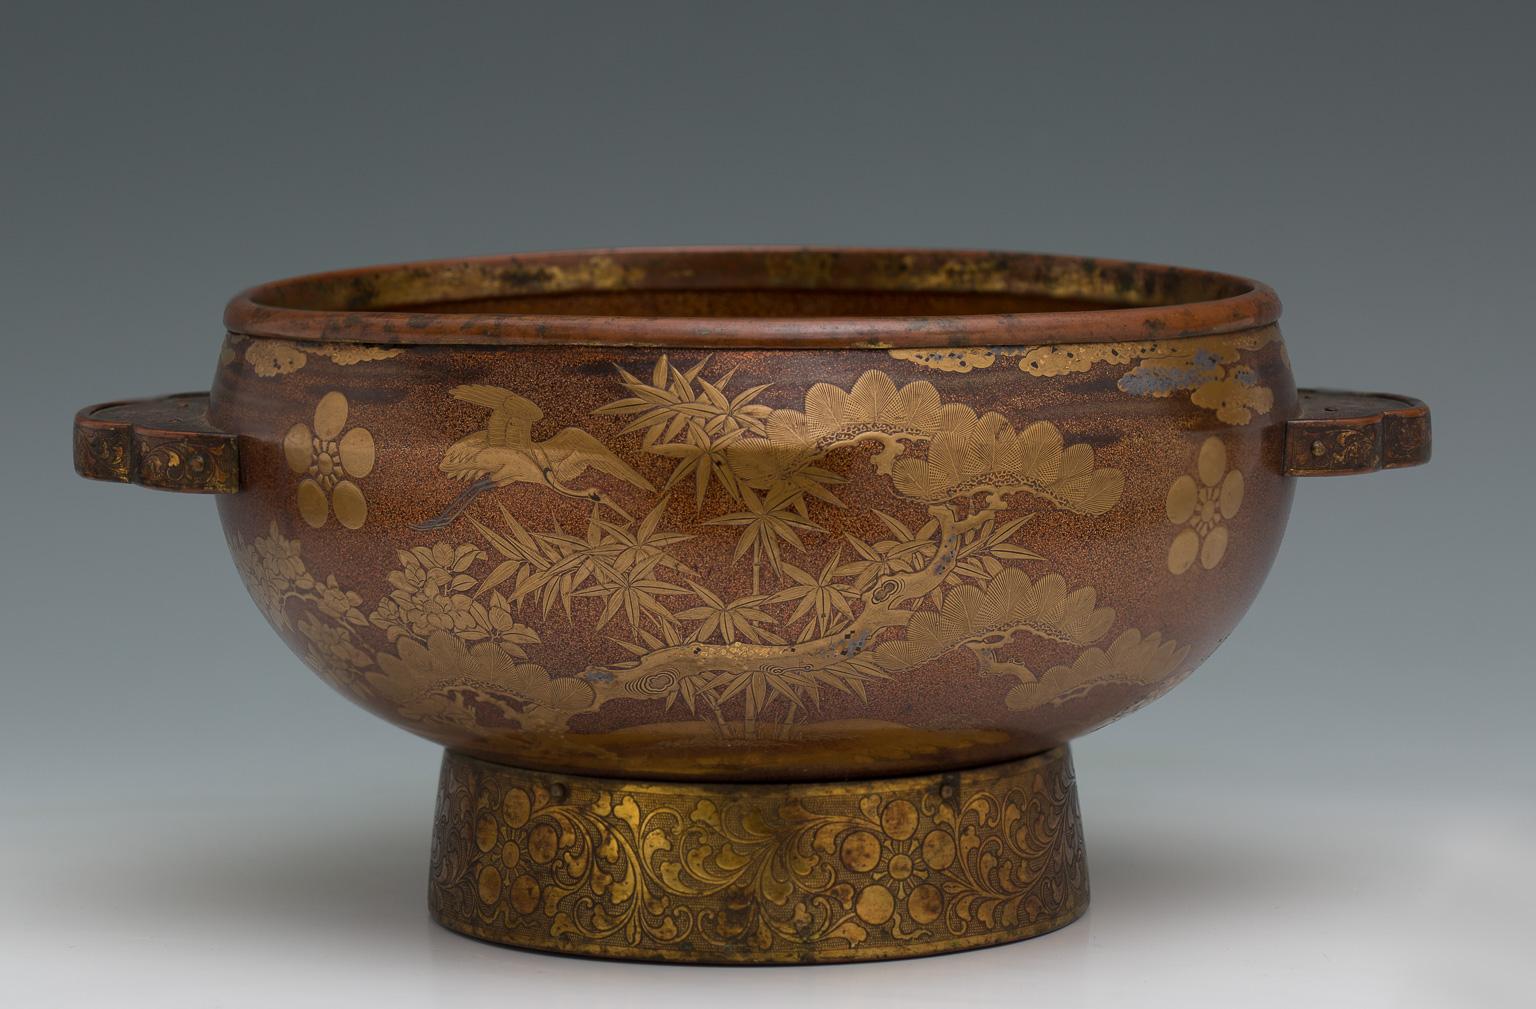 Wooden basin with ear-shaped handles decorated with hiramaki-e lacquer and gold and silver kirigane on a nashi-ji ground.
The large and thick antique wooden basin is completely lacquered in nashiji gold, with cranes flying among pines, bamboo and